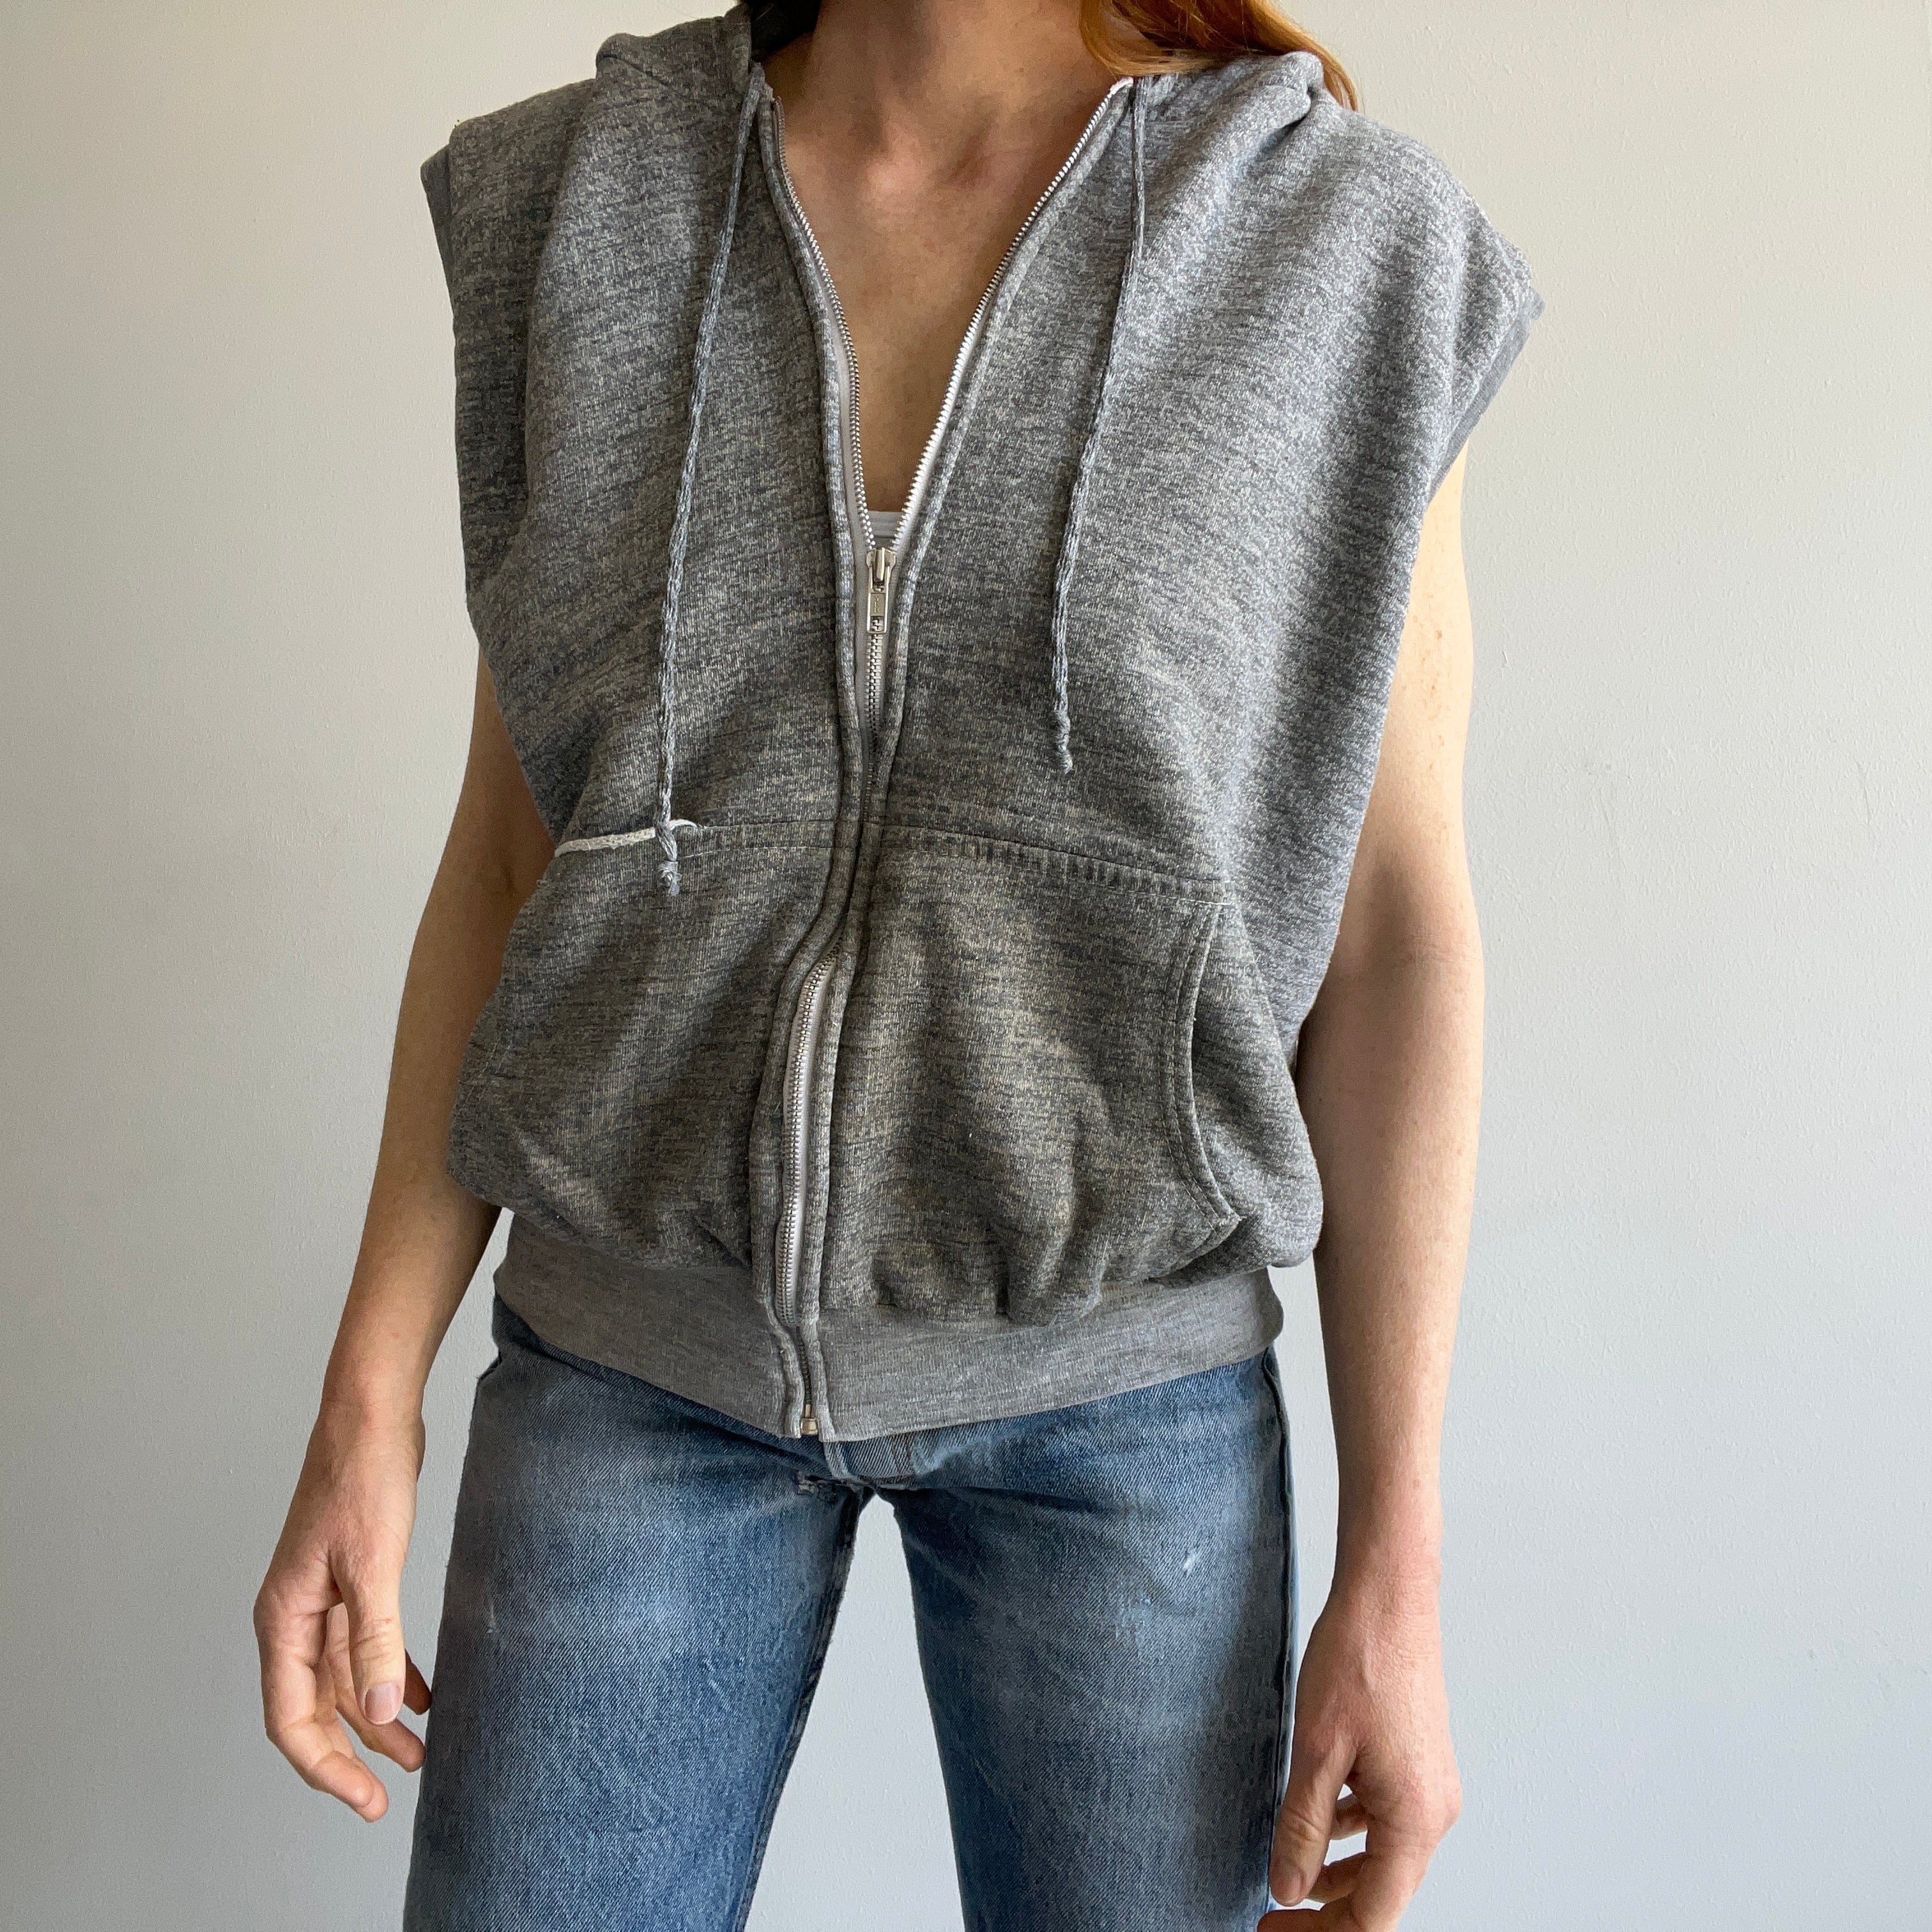 1970s Super Aged and Beat Up Insulated Zip Up Hoodie Vest - WOW